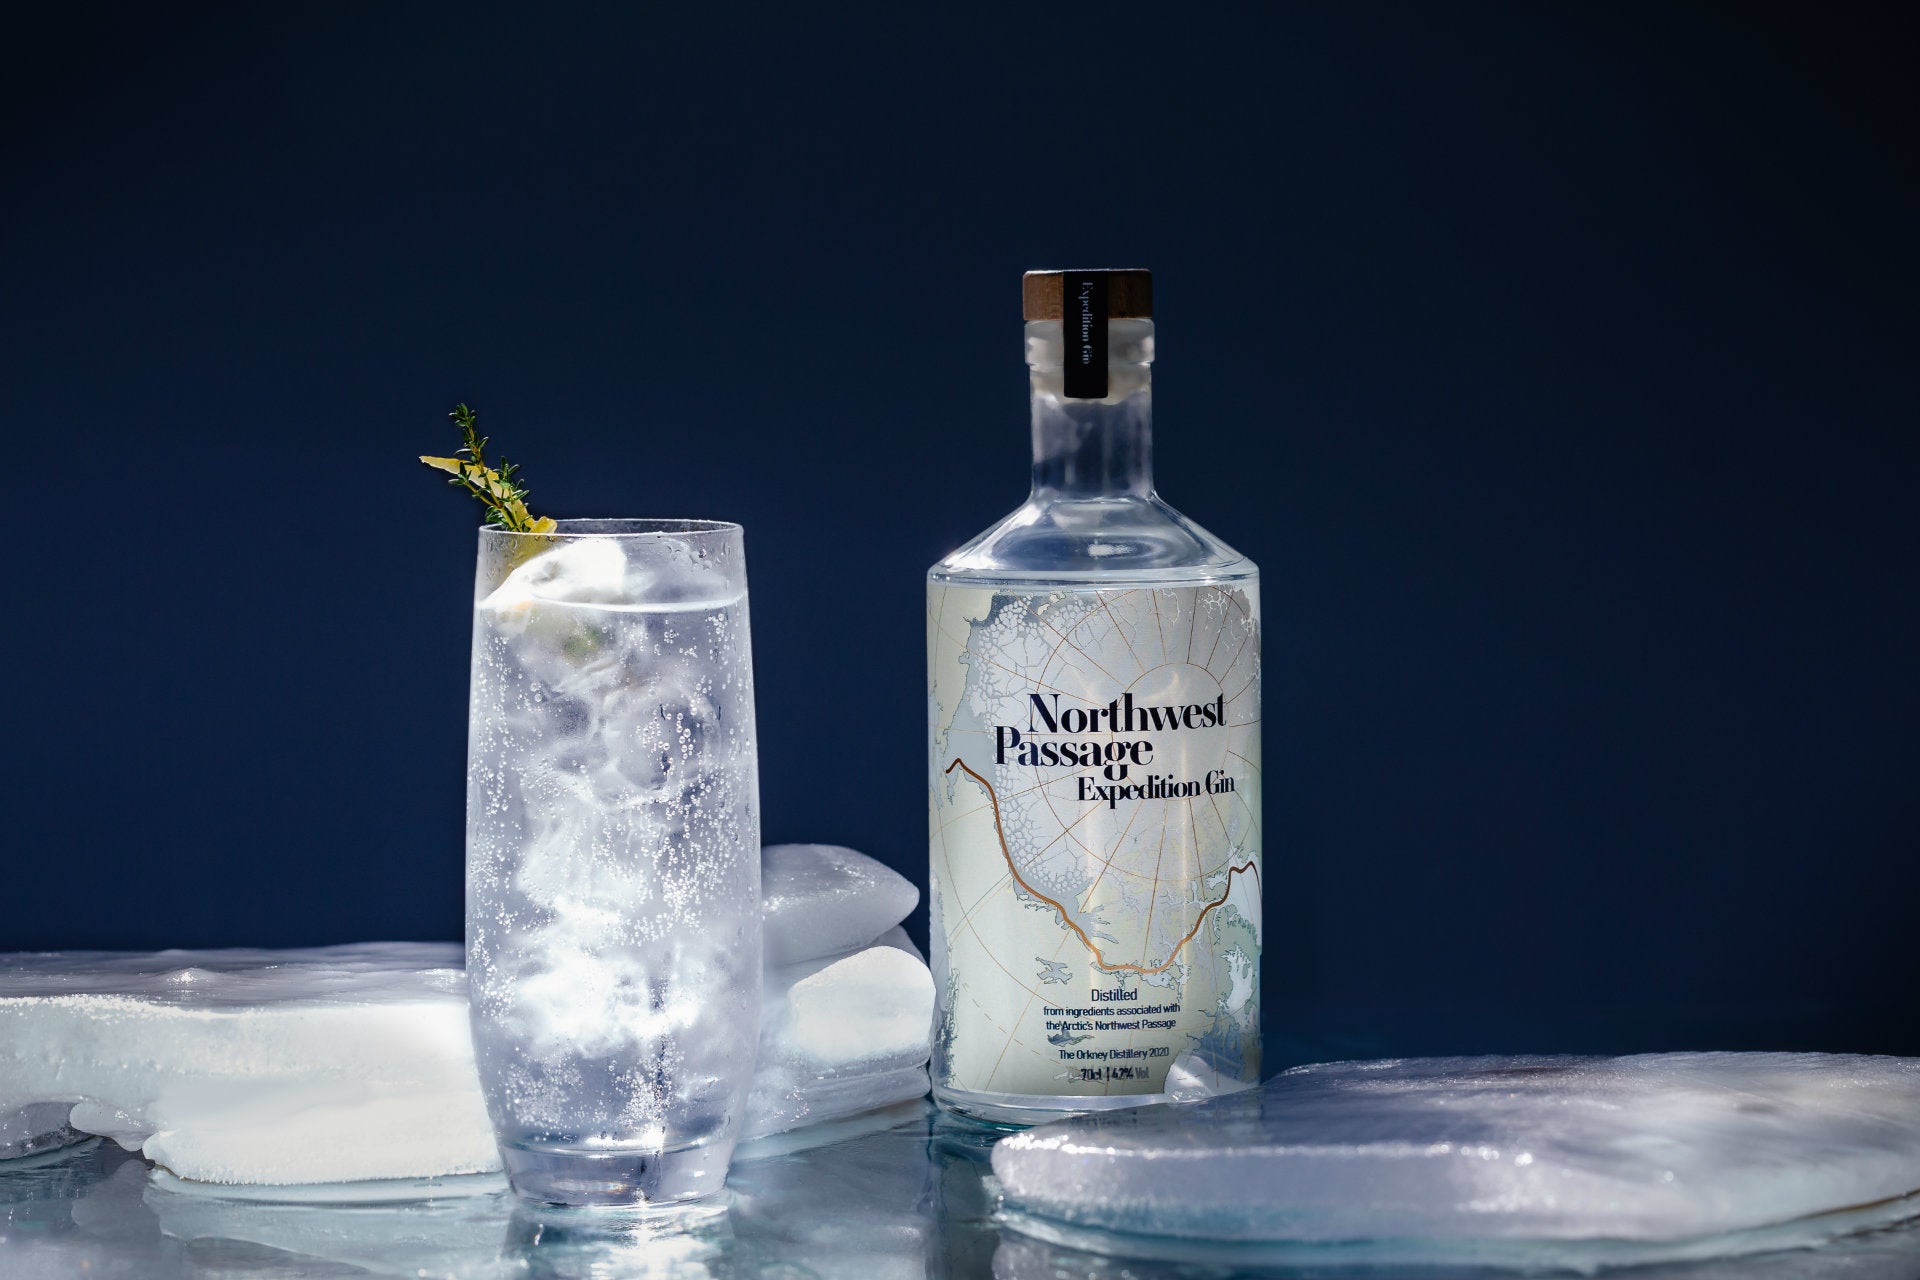 Northwest Passage Expedition Gin wins gold at The Gin Masters 2021